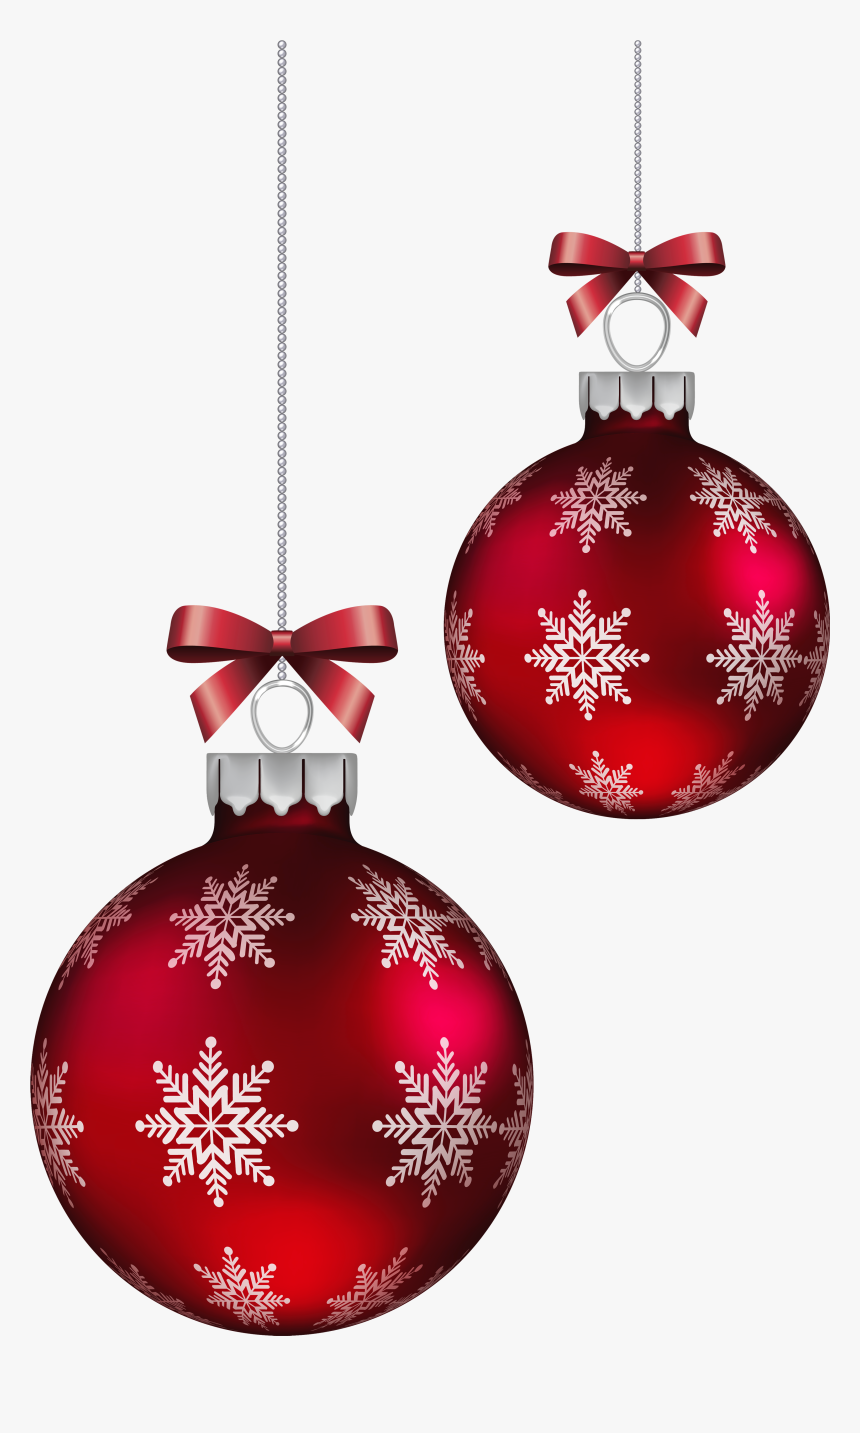 Red Christmas Balls Png - Christmas Decorations Red Balls, Transparent Png, Free Download